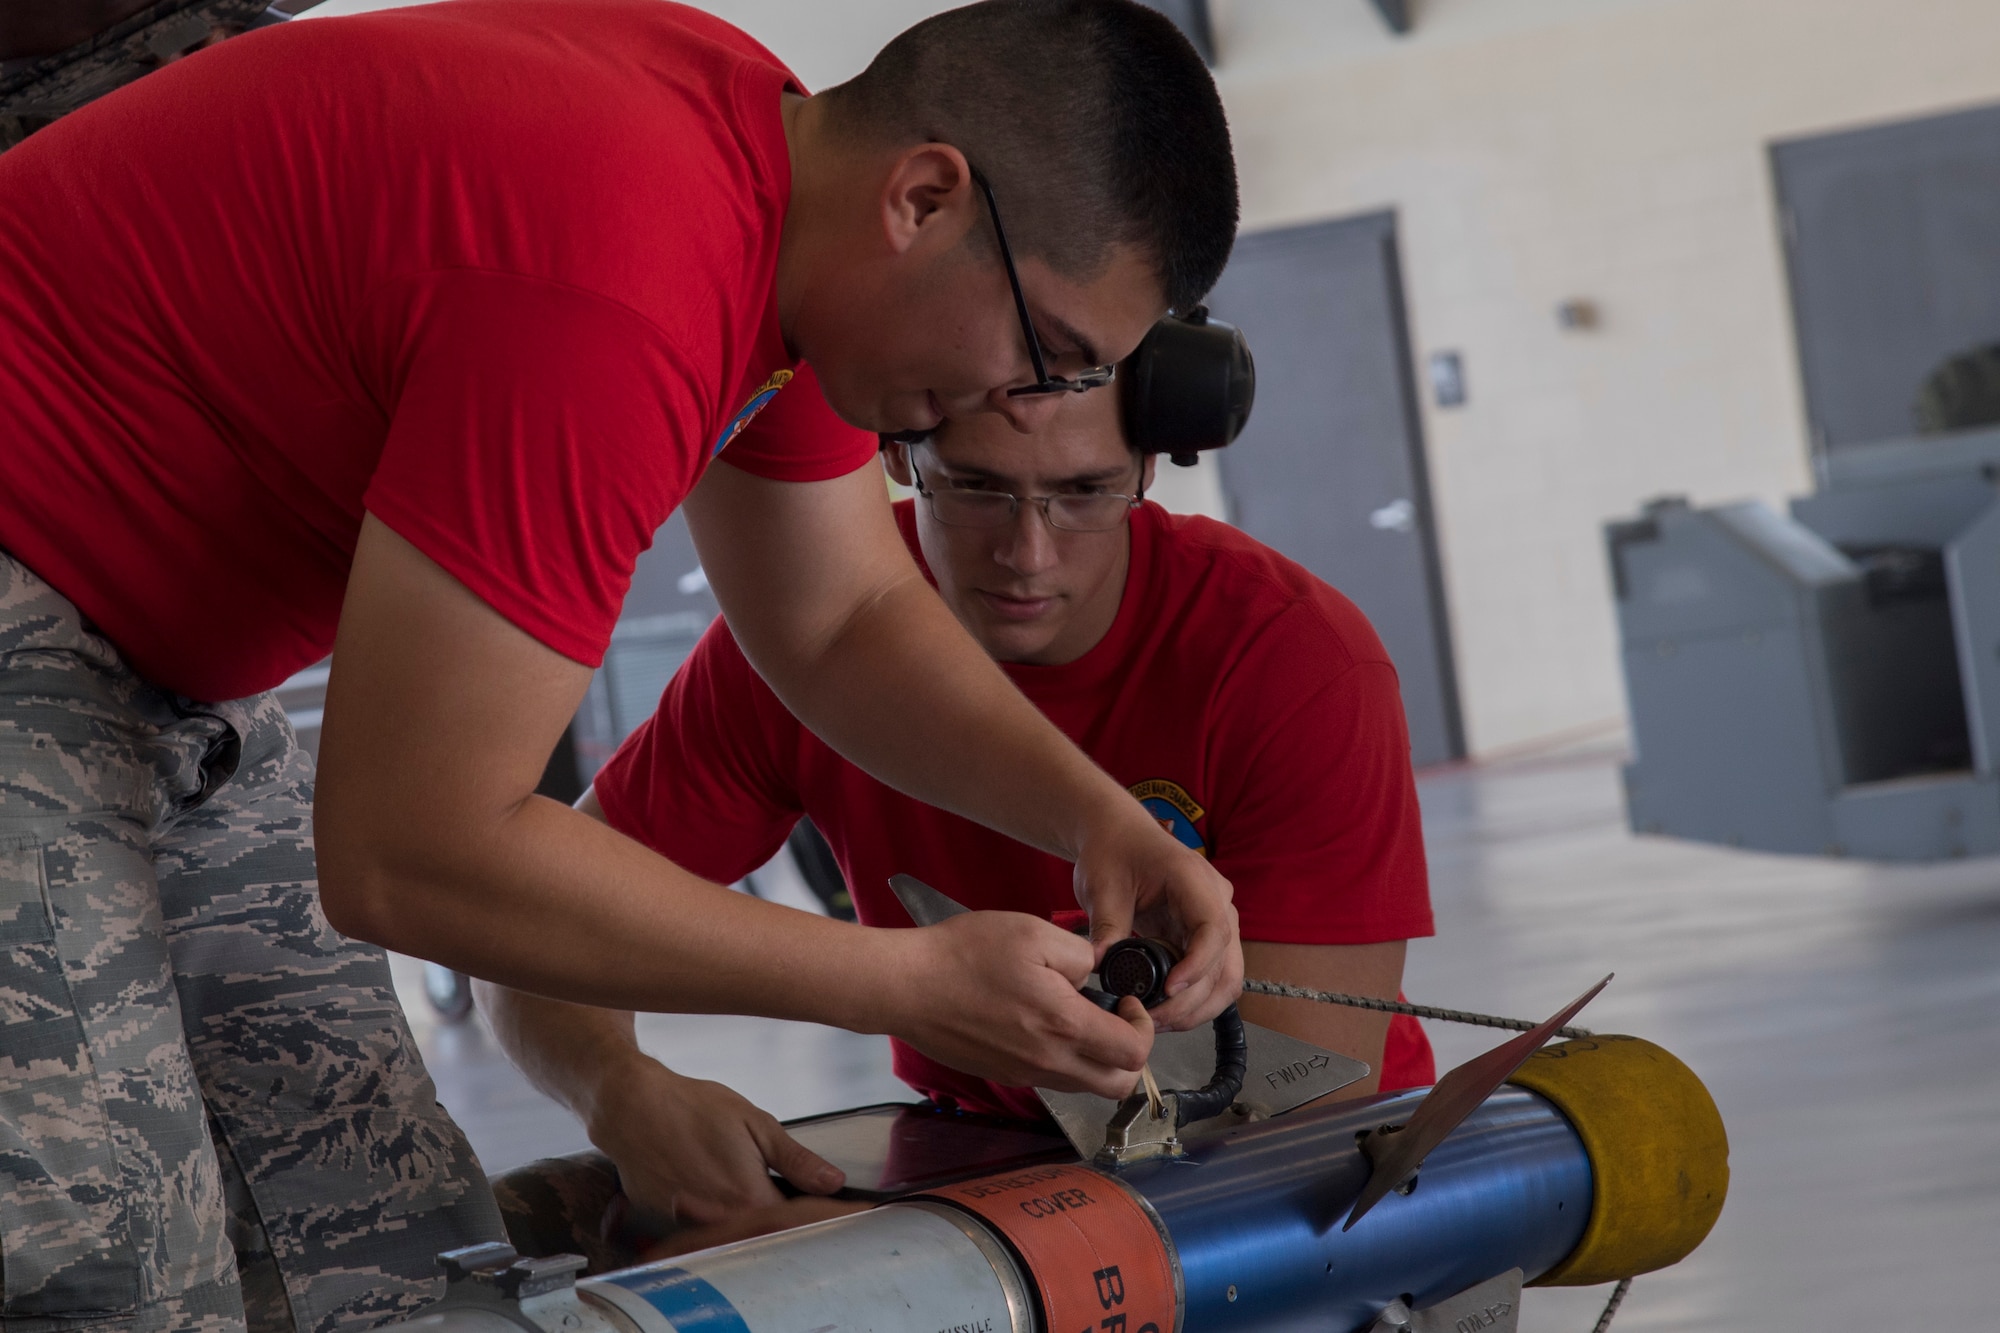 Airman 1st Class Alan Oseguera (left), 75th Aircraft Maintenance Unit weapons load crew member, and Staff Sgt. Christopher Carlson, 75th AMU weapons load team chief, prepare to load a AIM-9 Sidewinder, during the weapons load competition July 14, 2017, at Moody Air Force Base, Ga. Every quarter members of the 74th and 75th AMU competes in the quarterly competition that tests knowledge, dress and appearance, and speed of loading a GBU-12 joint direct attack munition and AIM-9 Sidewinder. (U.S. Air Force photo by Staff Sgt. Eric Summers Jr.)